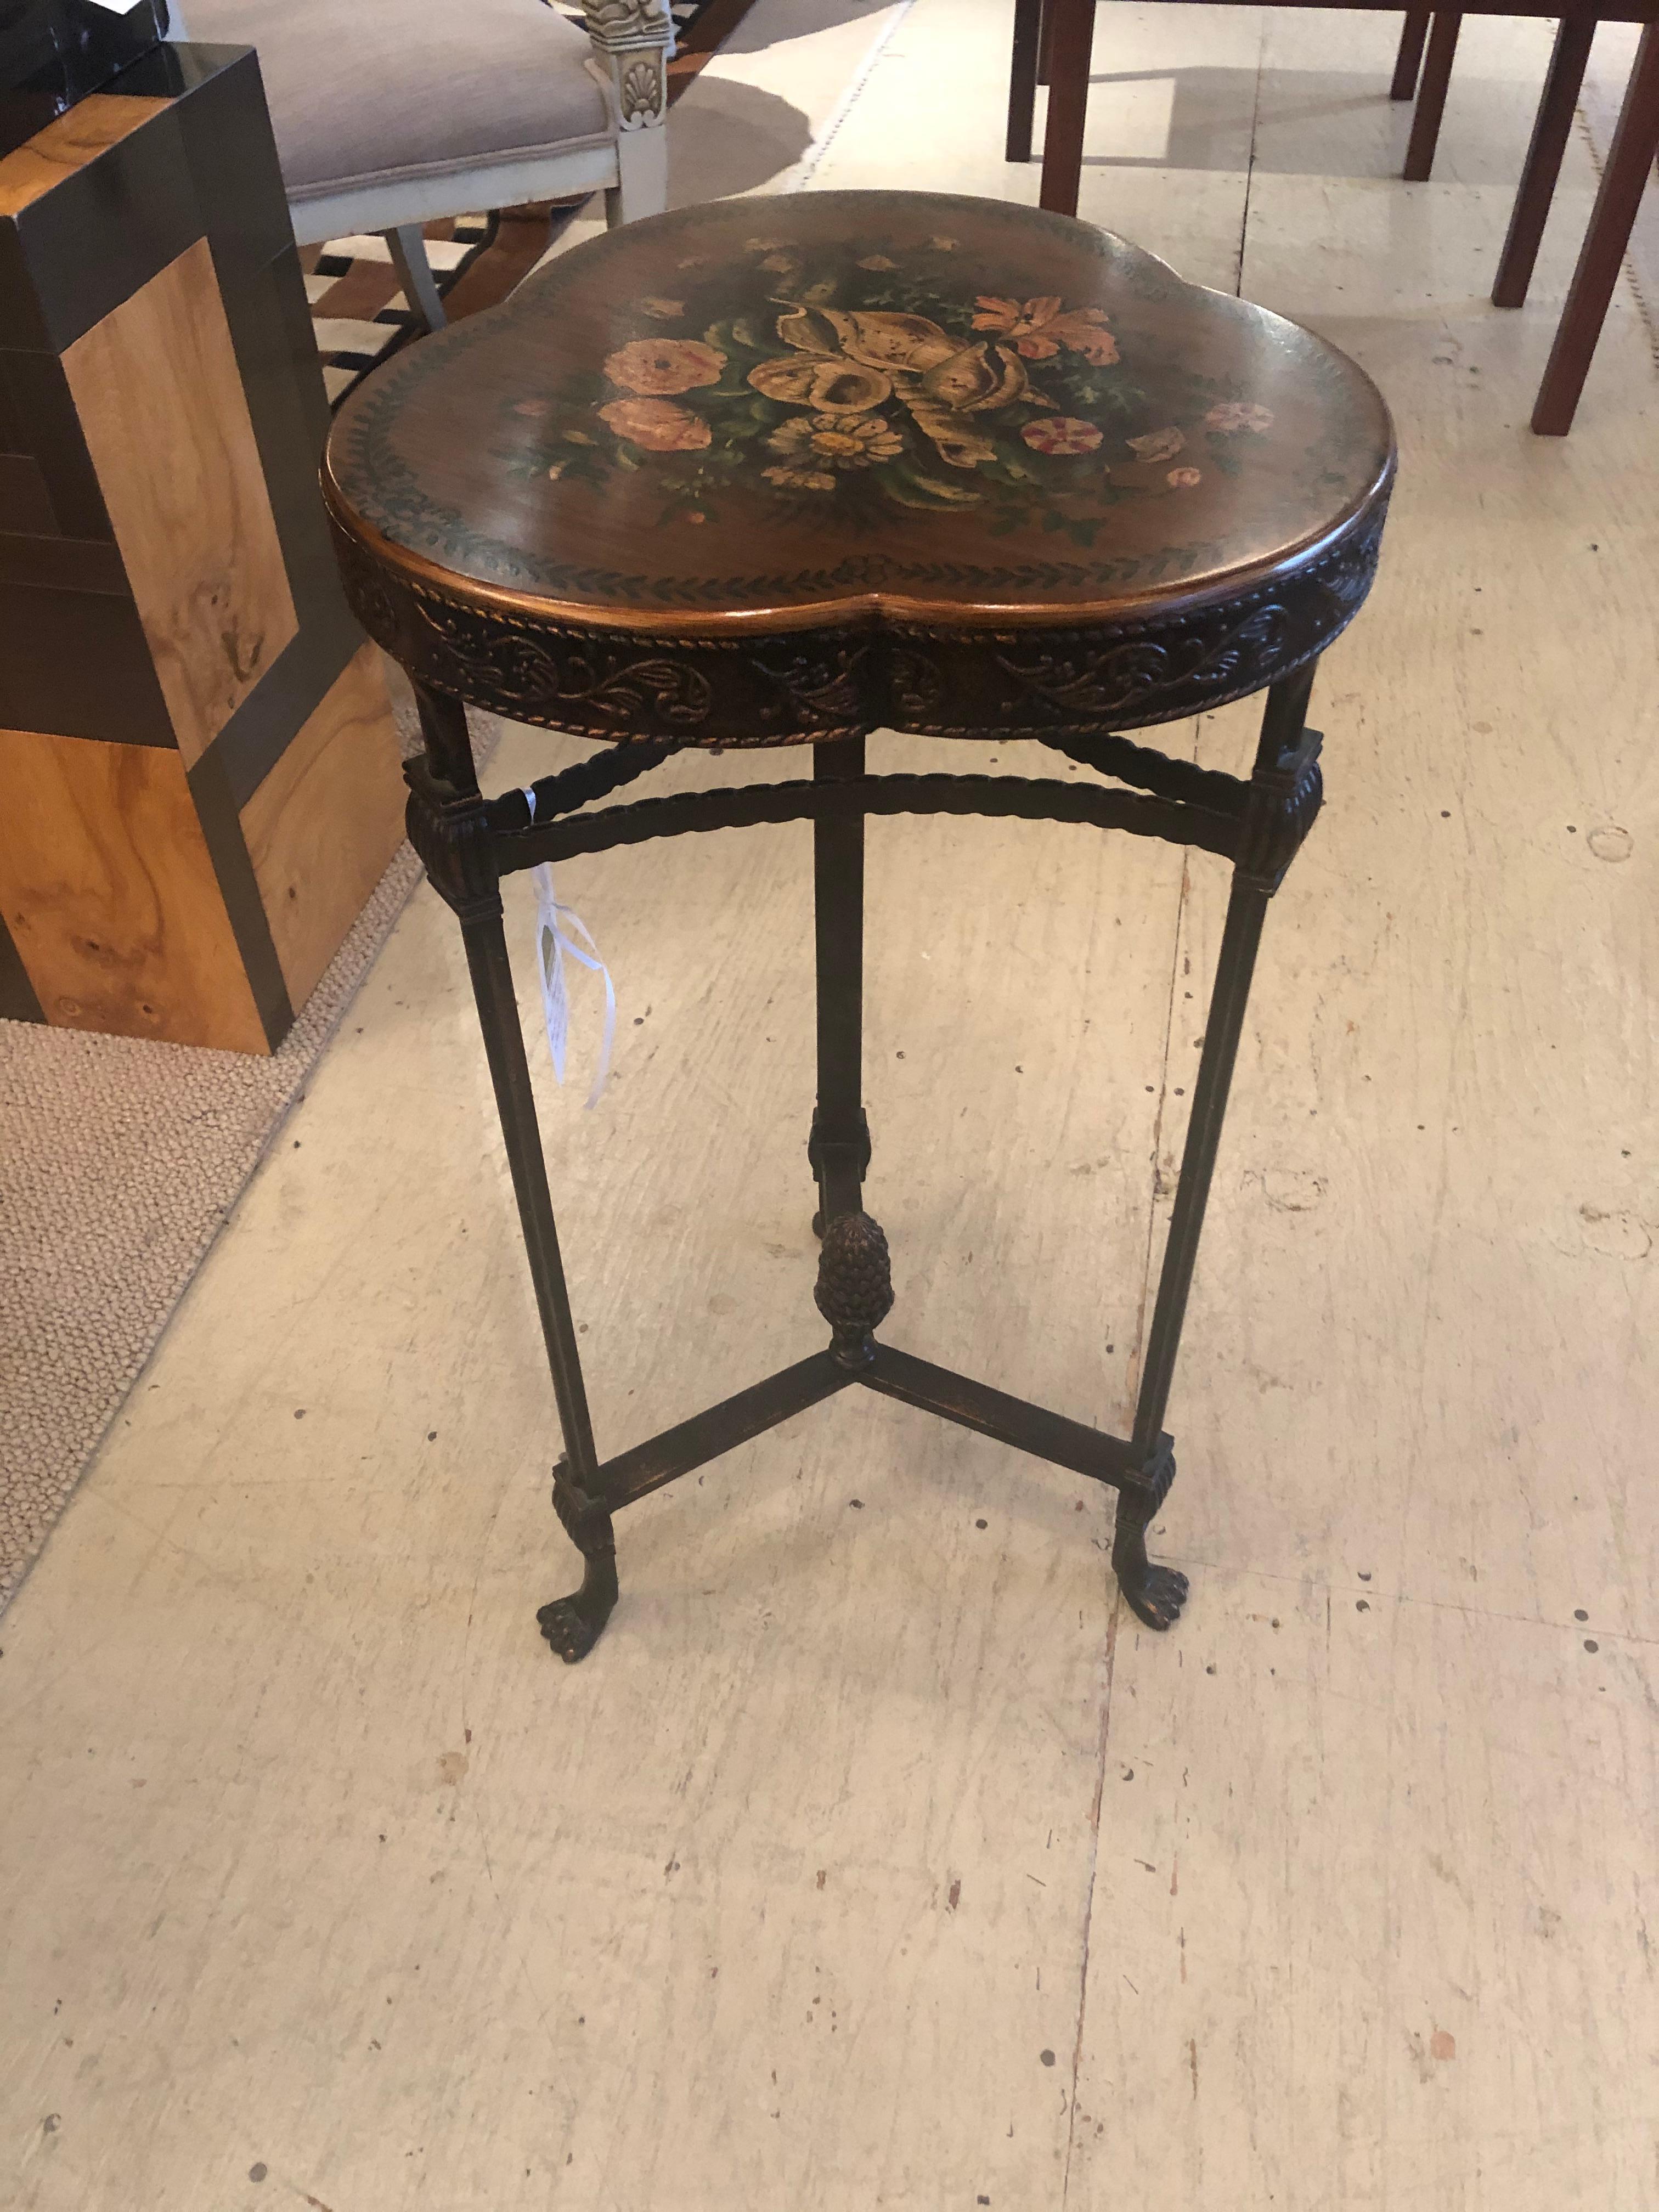 Shamrock shaped handsome end table having floral decoration on top, decorative embossed bronze finished metal on the sides, and 3 beautiful metal legs that terminate in feet with a central acorn finial.